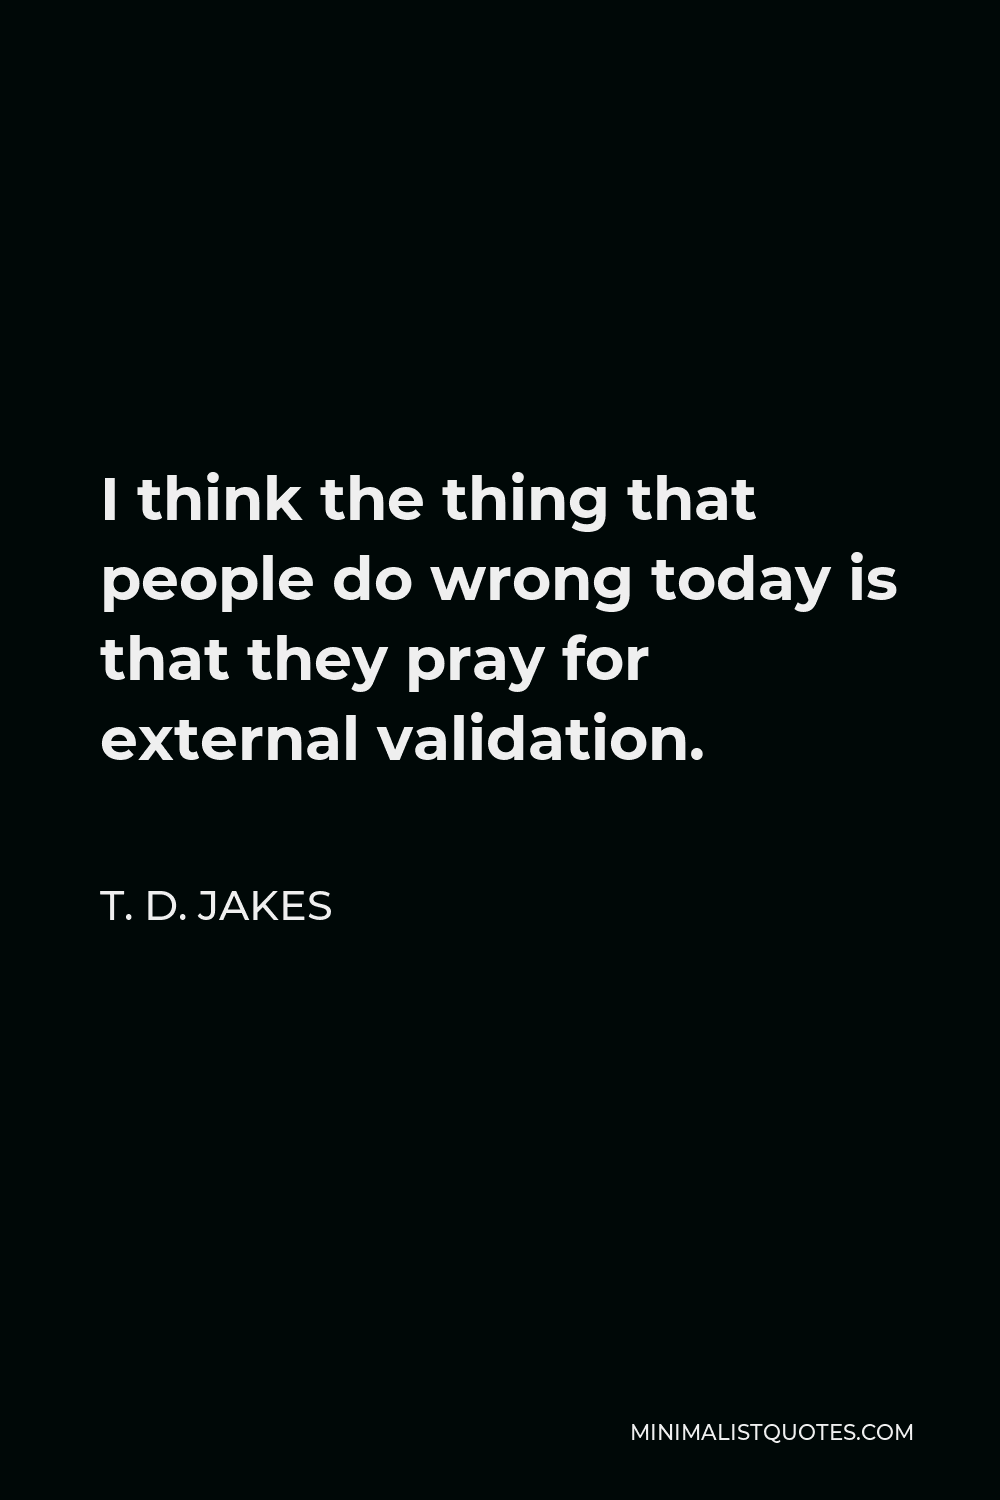 T. D. Jakes Quote - I think the thing that people do wrong today is that they pray for external validation.